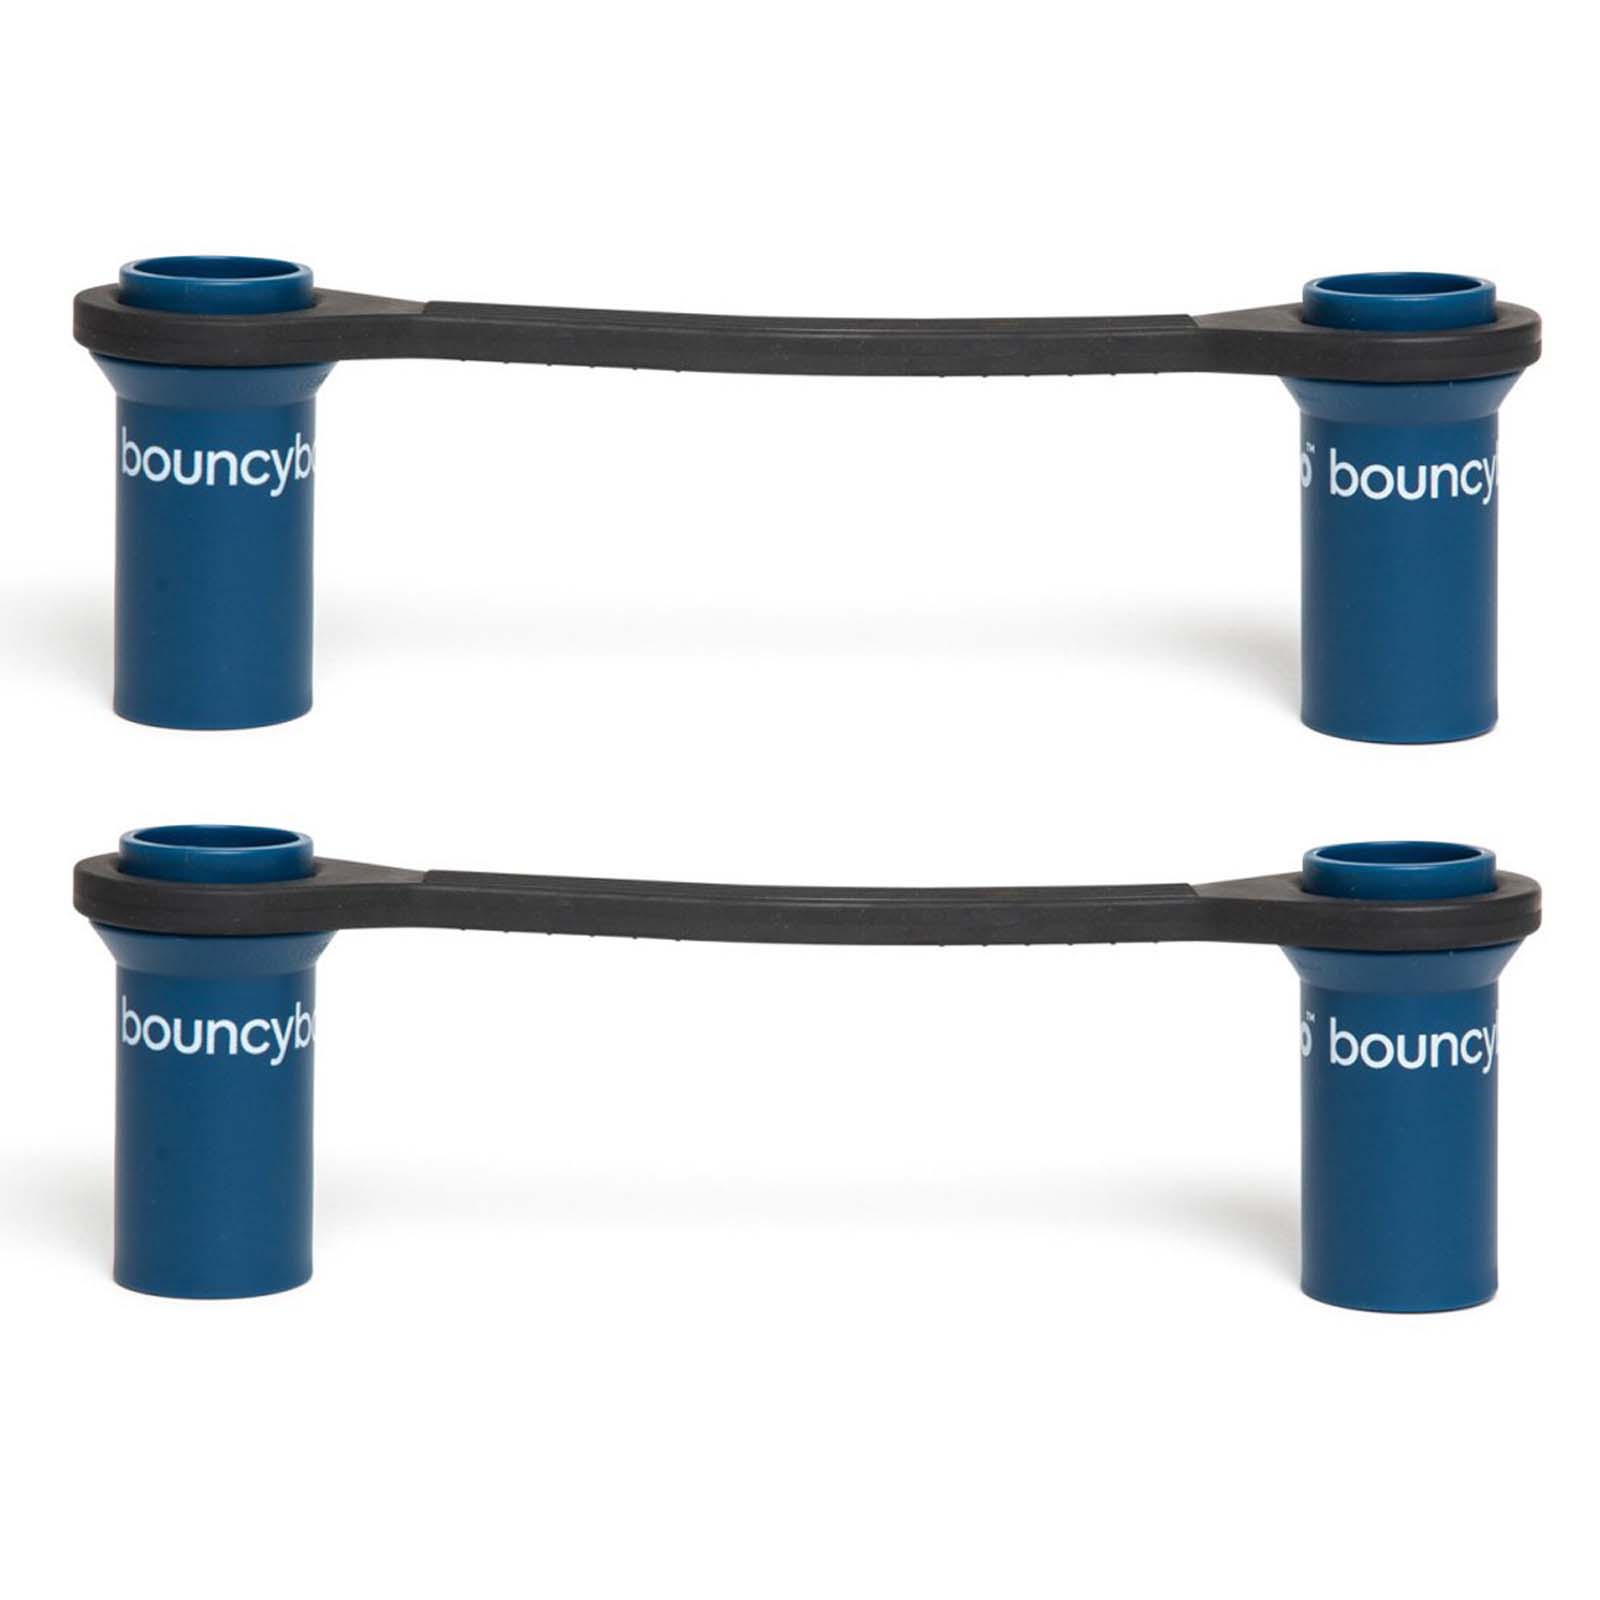 Bouncyband for Chairs, Blue, 2 Sets